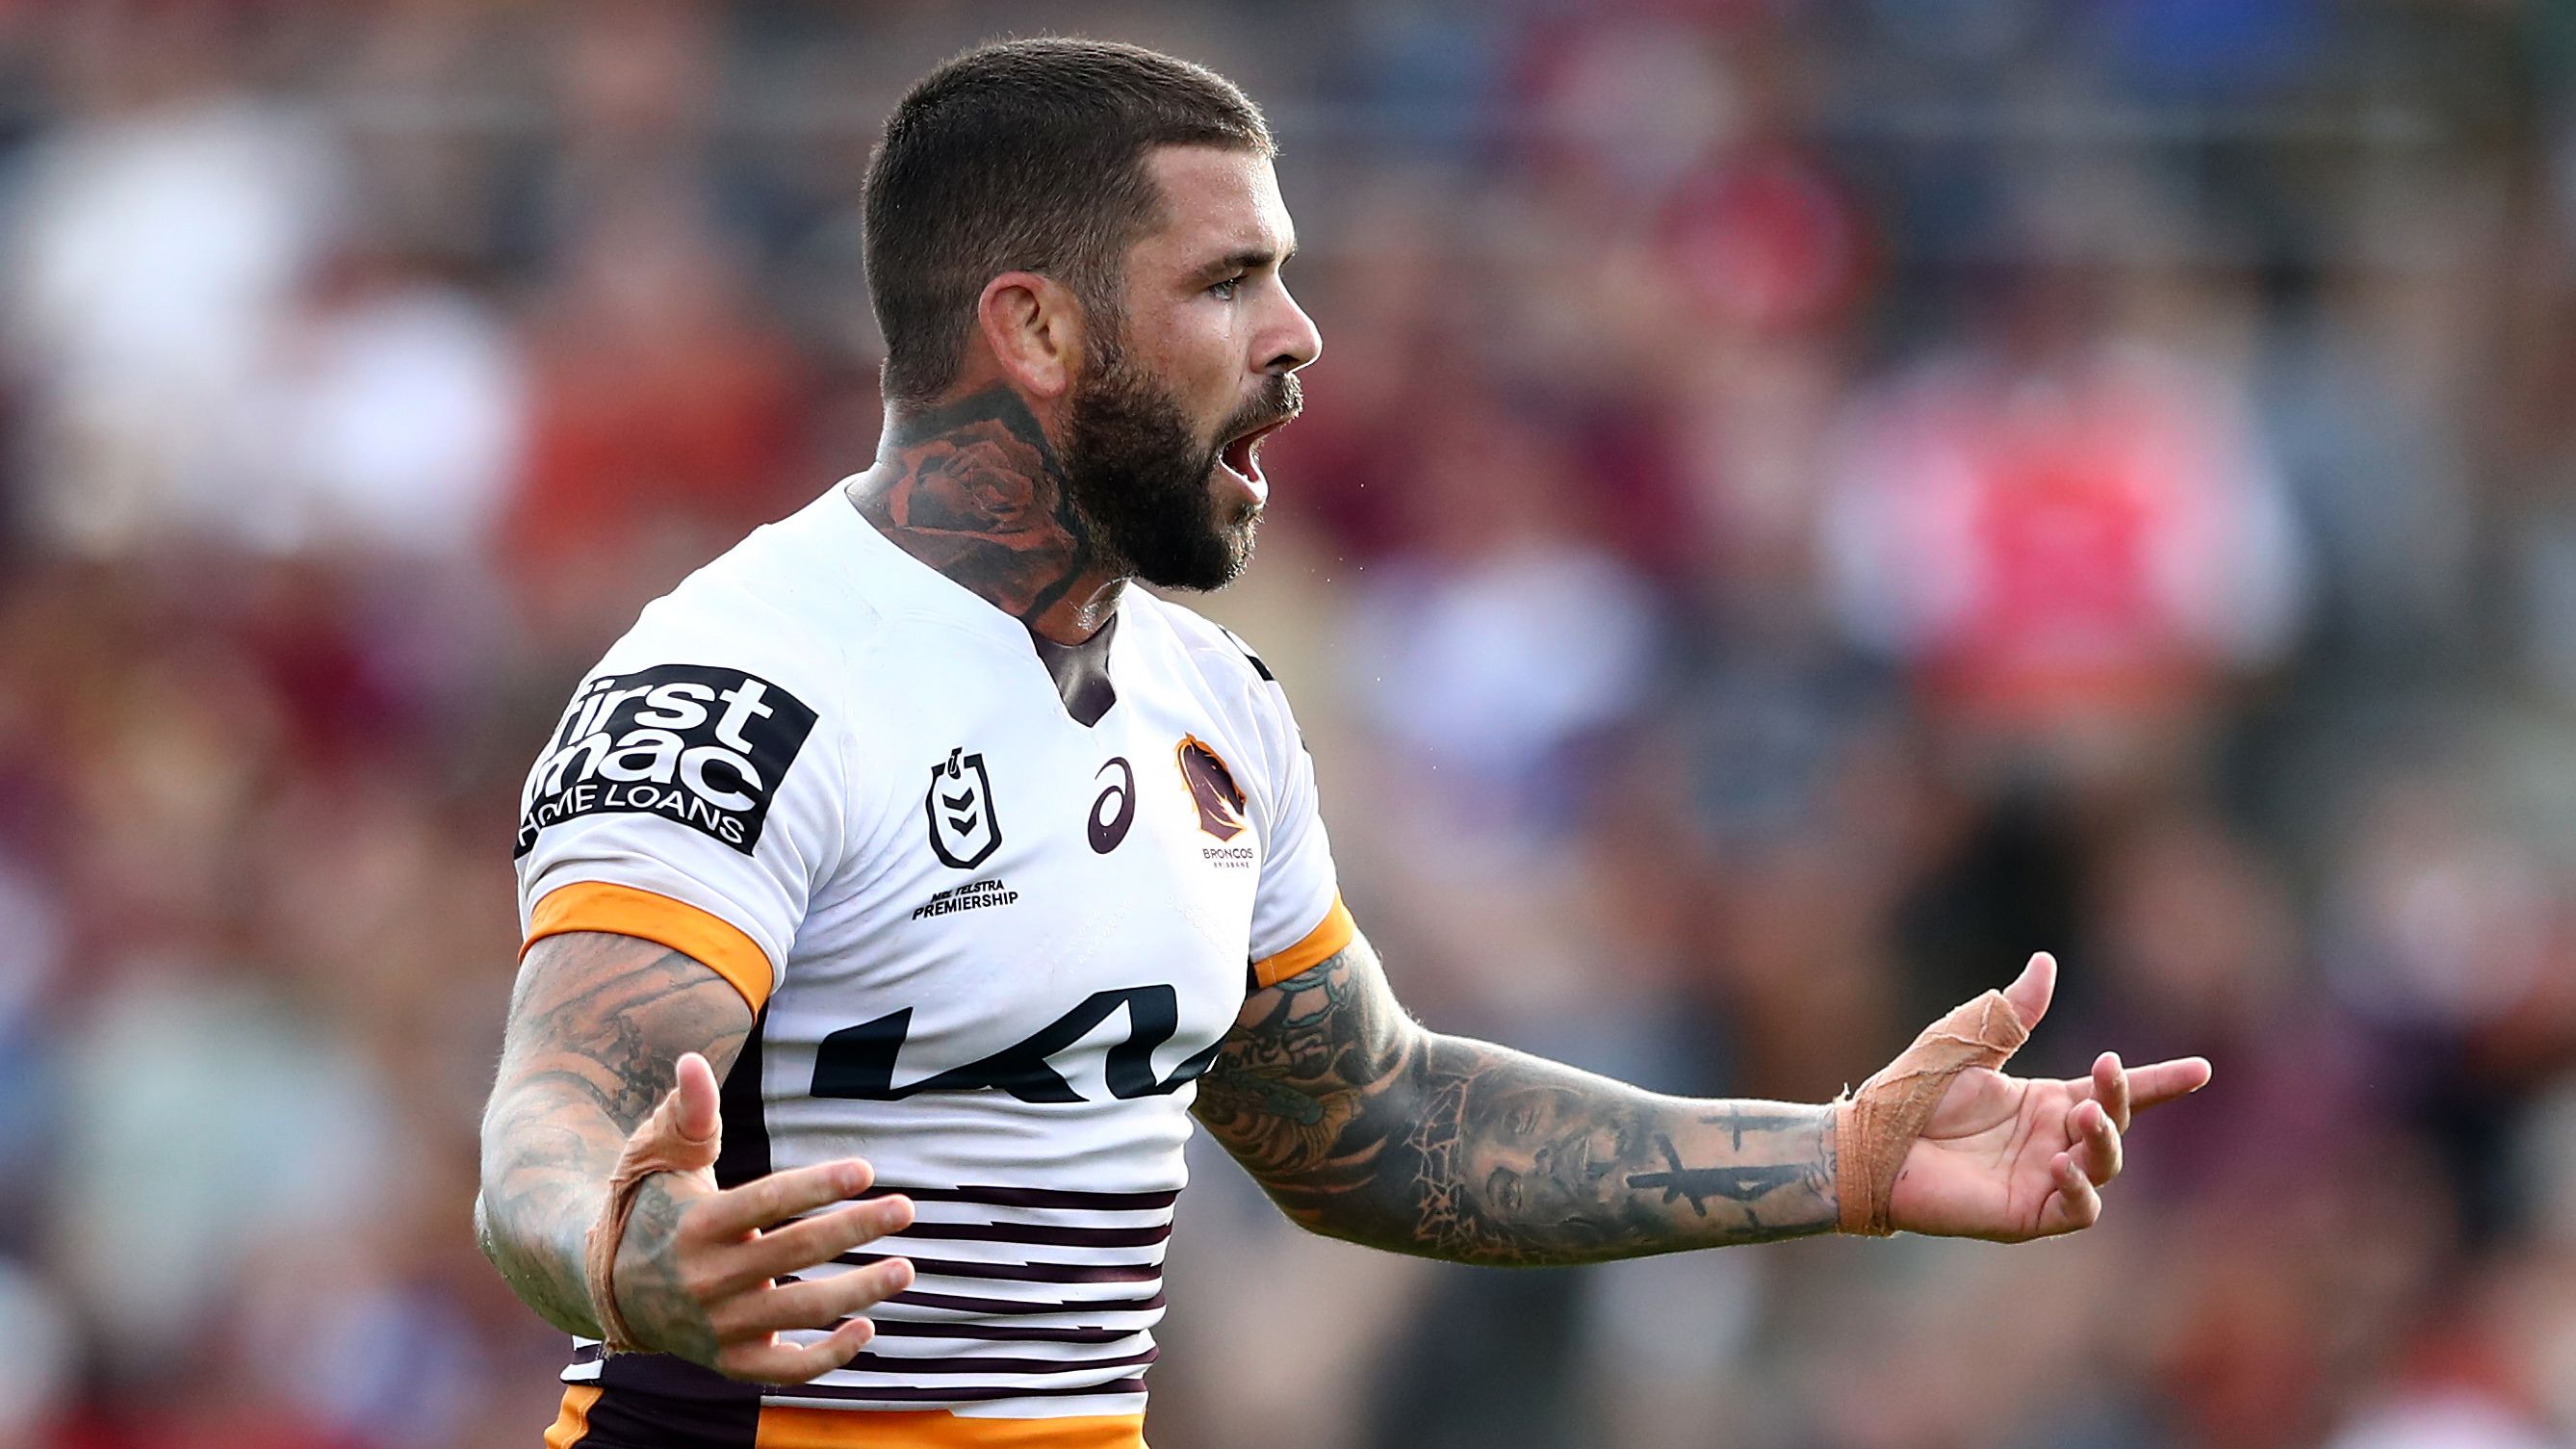 Adam Reynolds of the Broncos reacts during the round four NRL match between the New Zealand Warriors and the Brisbane Broncos at Moreton Daily Stadium, on April 02, 2022, in Brisbane, Australia. (Photo by Chris Hyde/Getty Images)